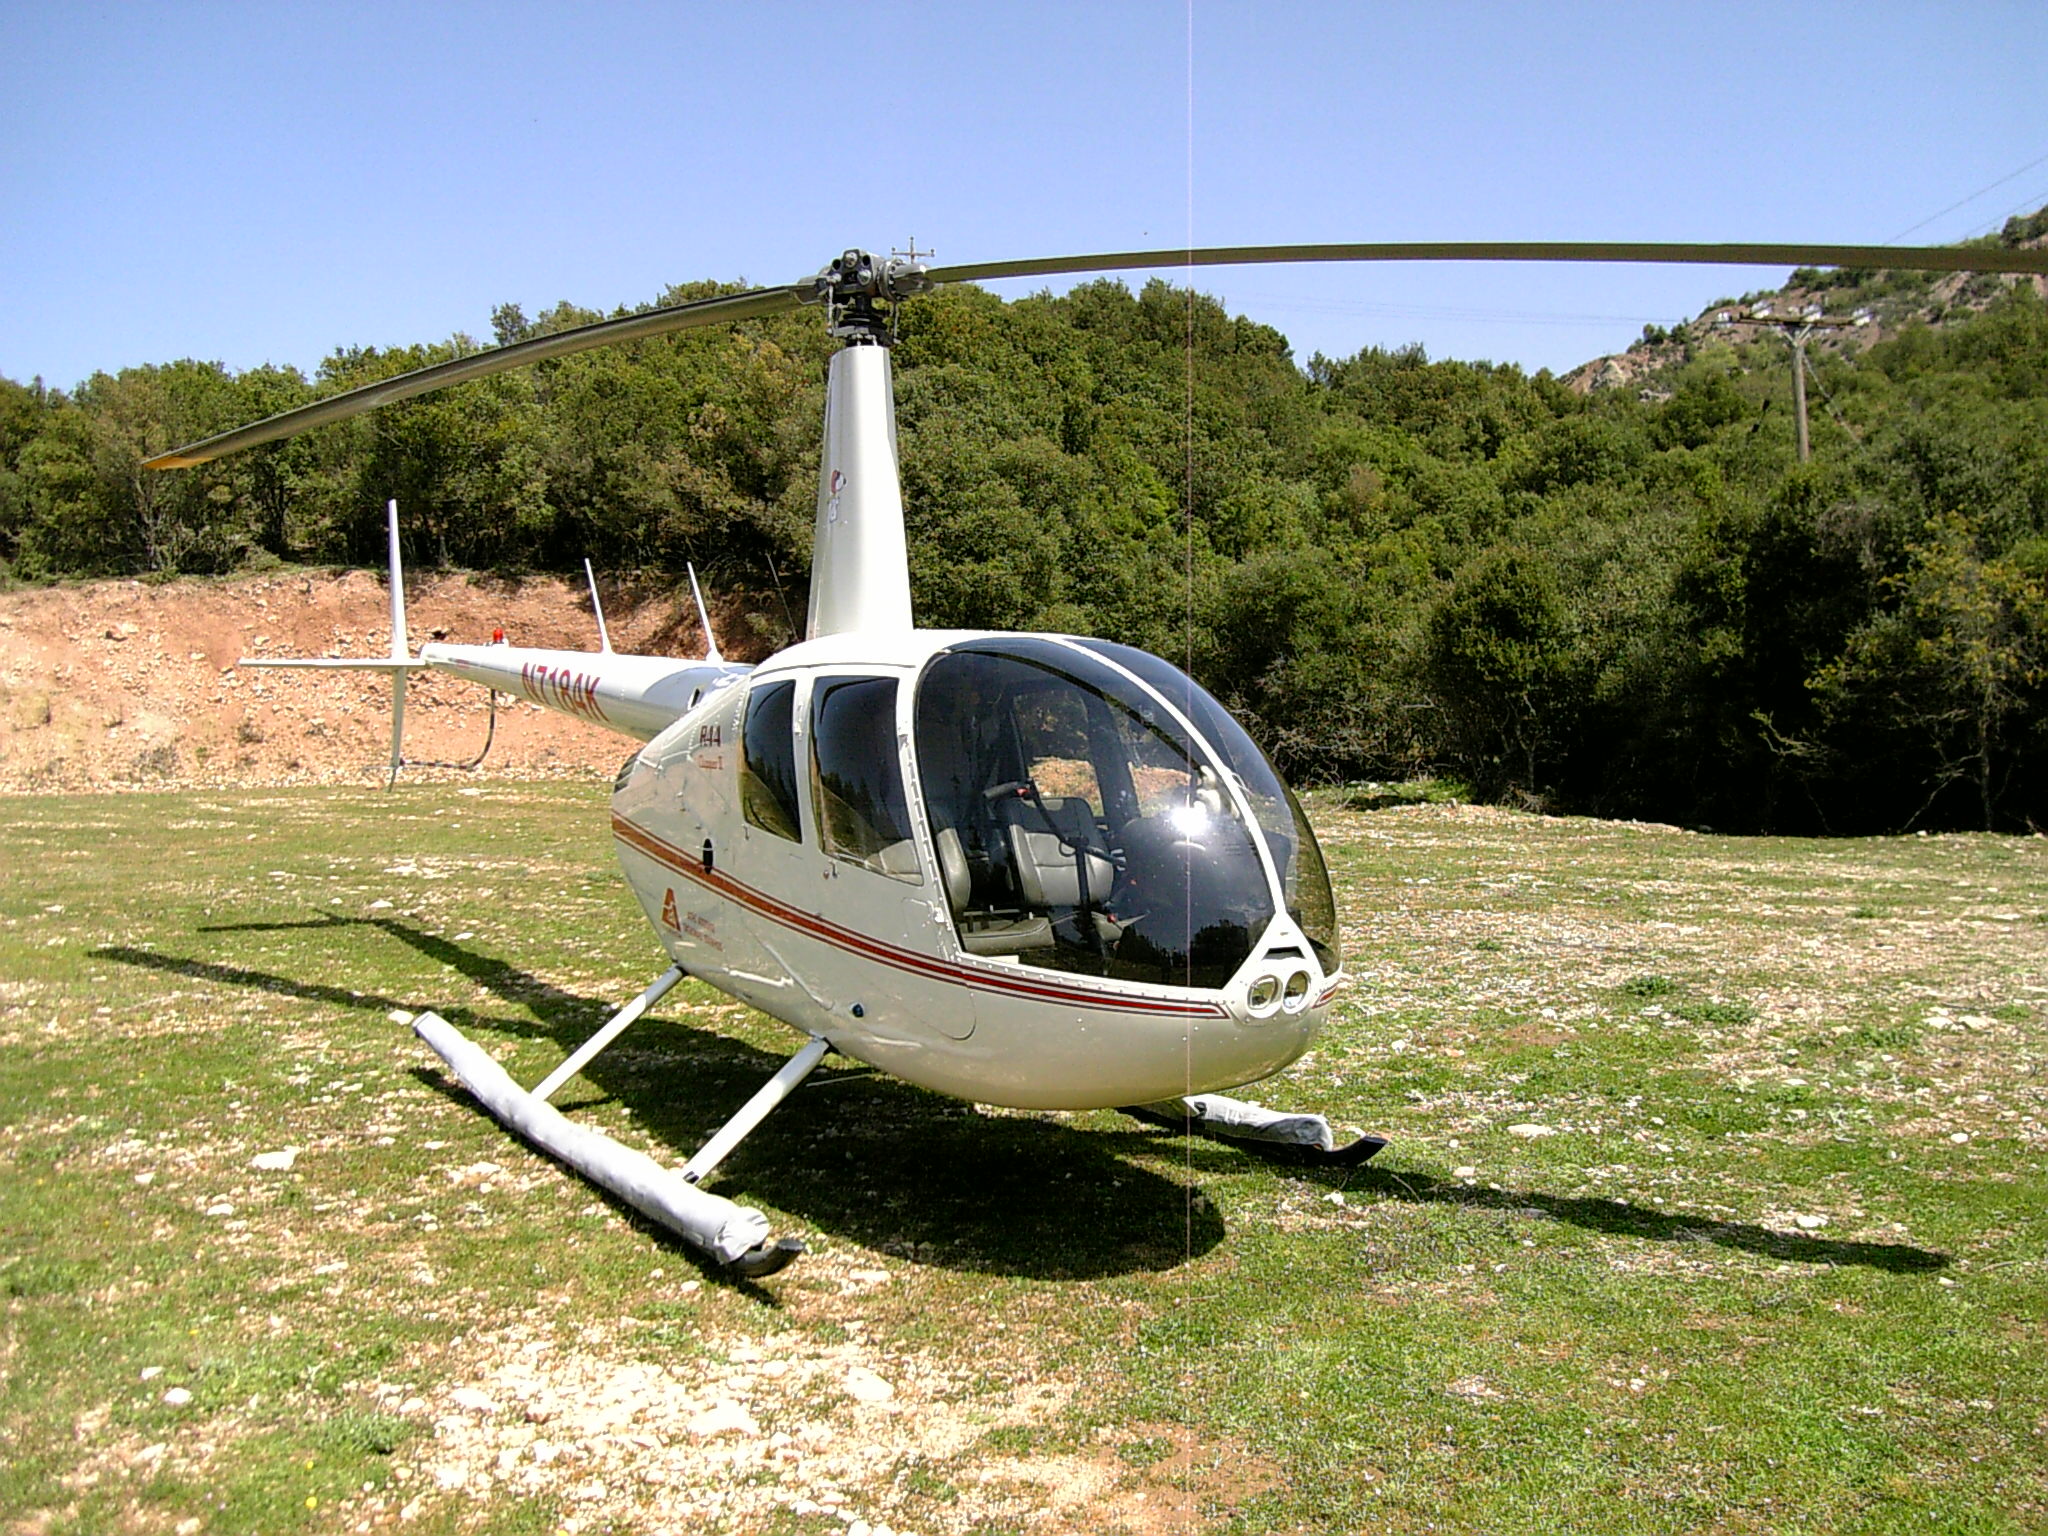 inflatable floatation system on an R44